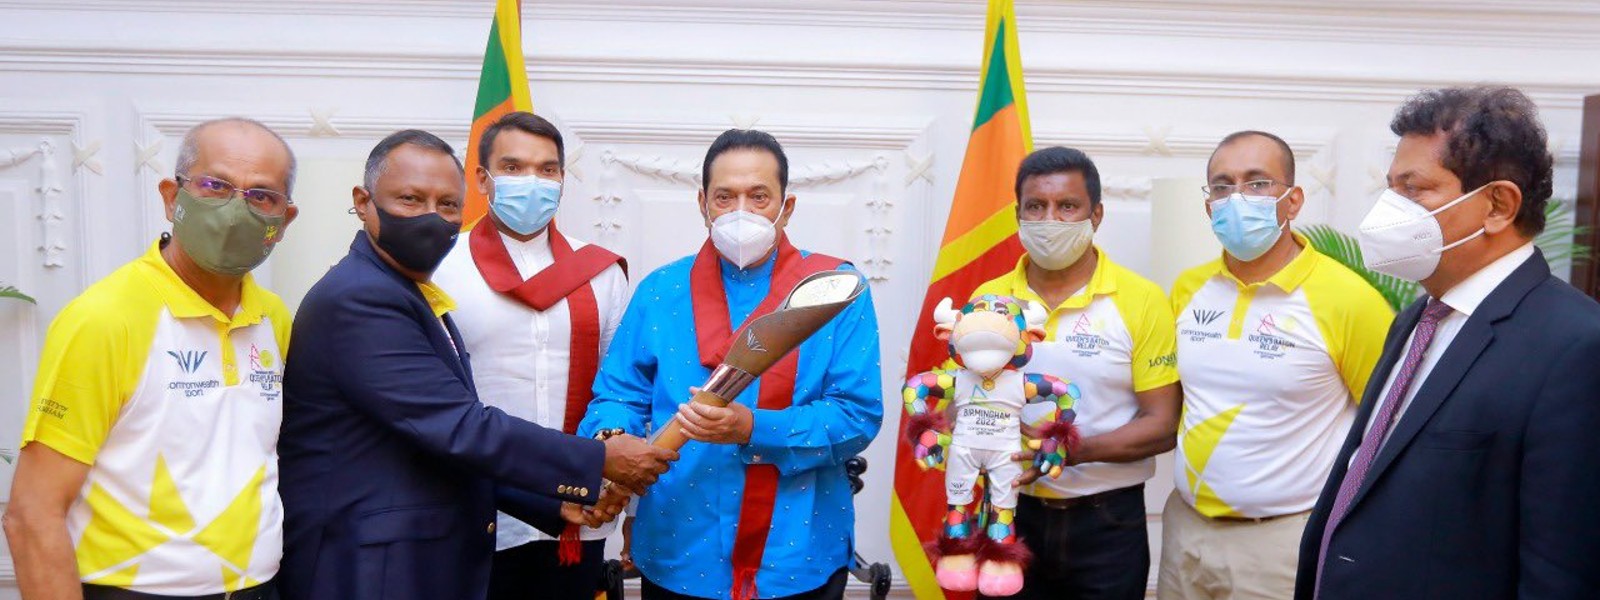 2022 Queen’s Baton handed over to PM